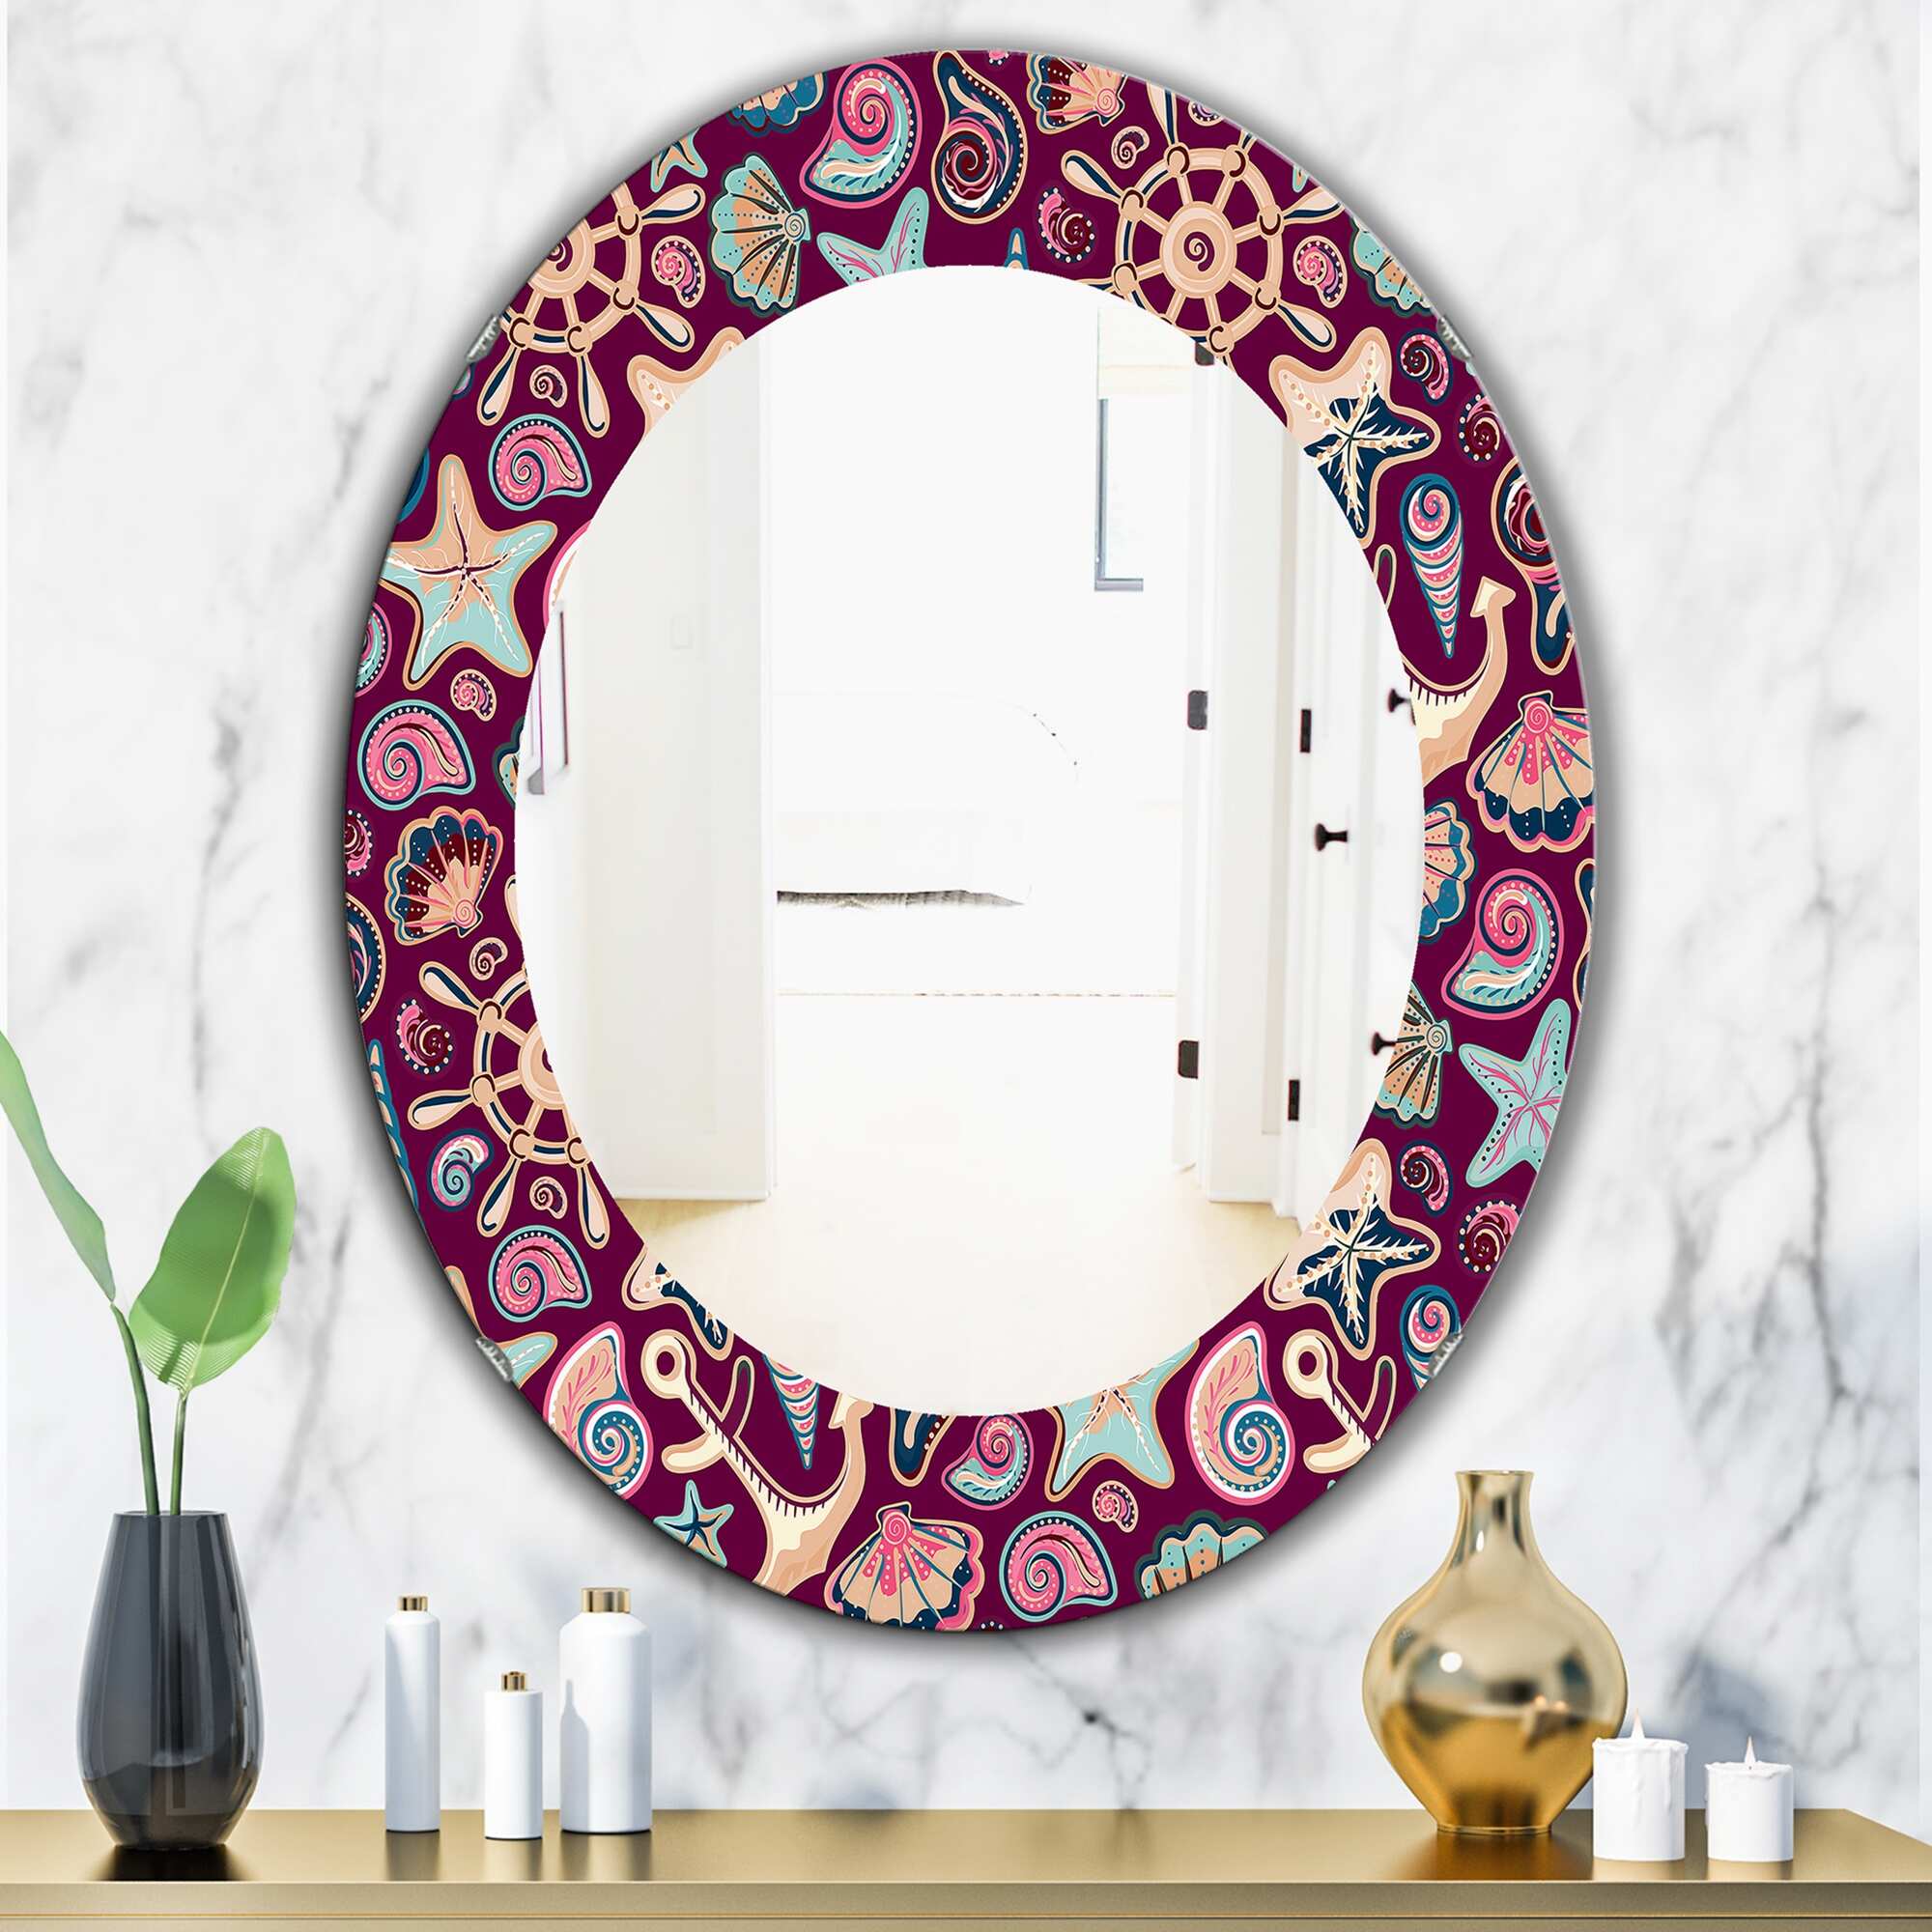 Designart 'Costal Creatures 13' Printed Traditional Oval or Round Wall Mirror - Purple